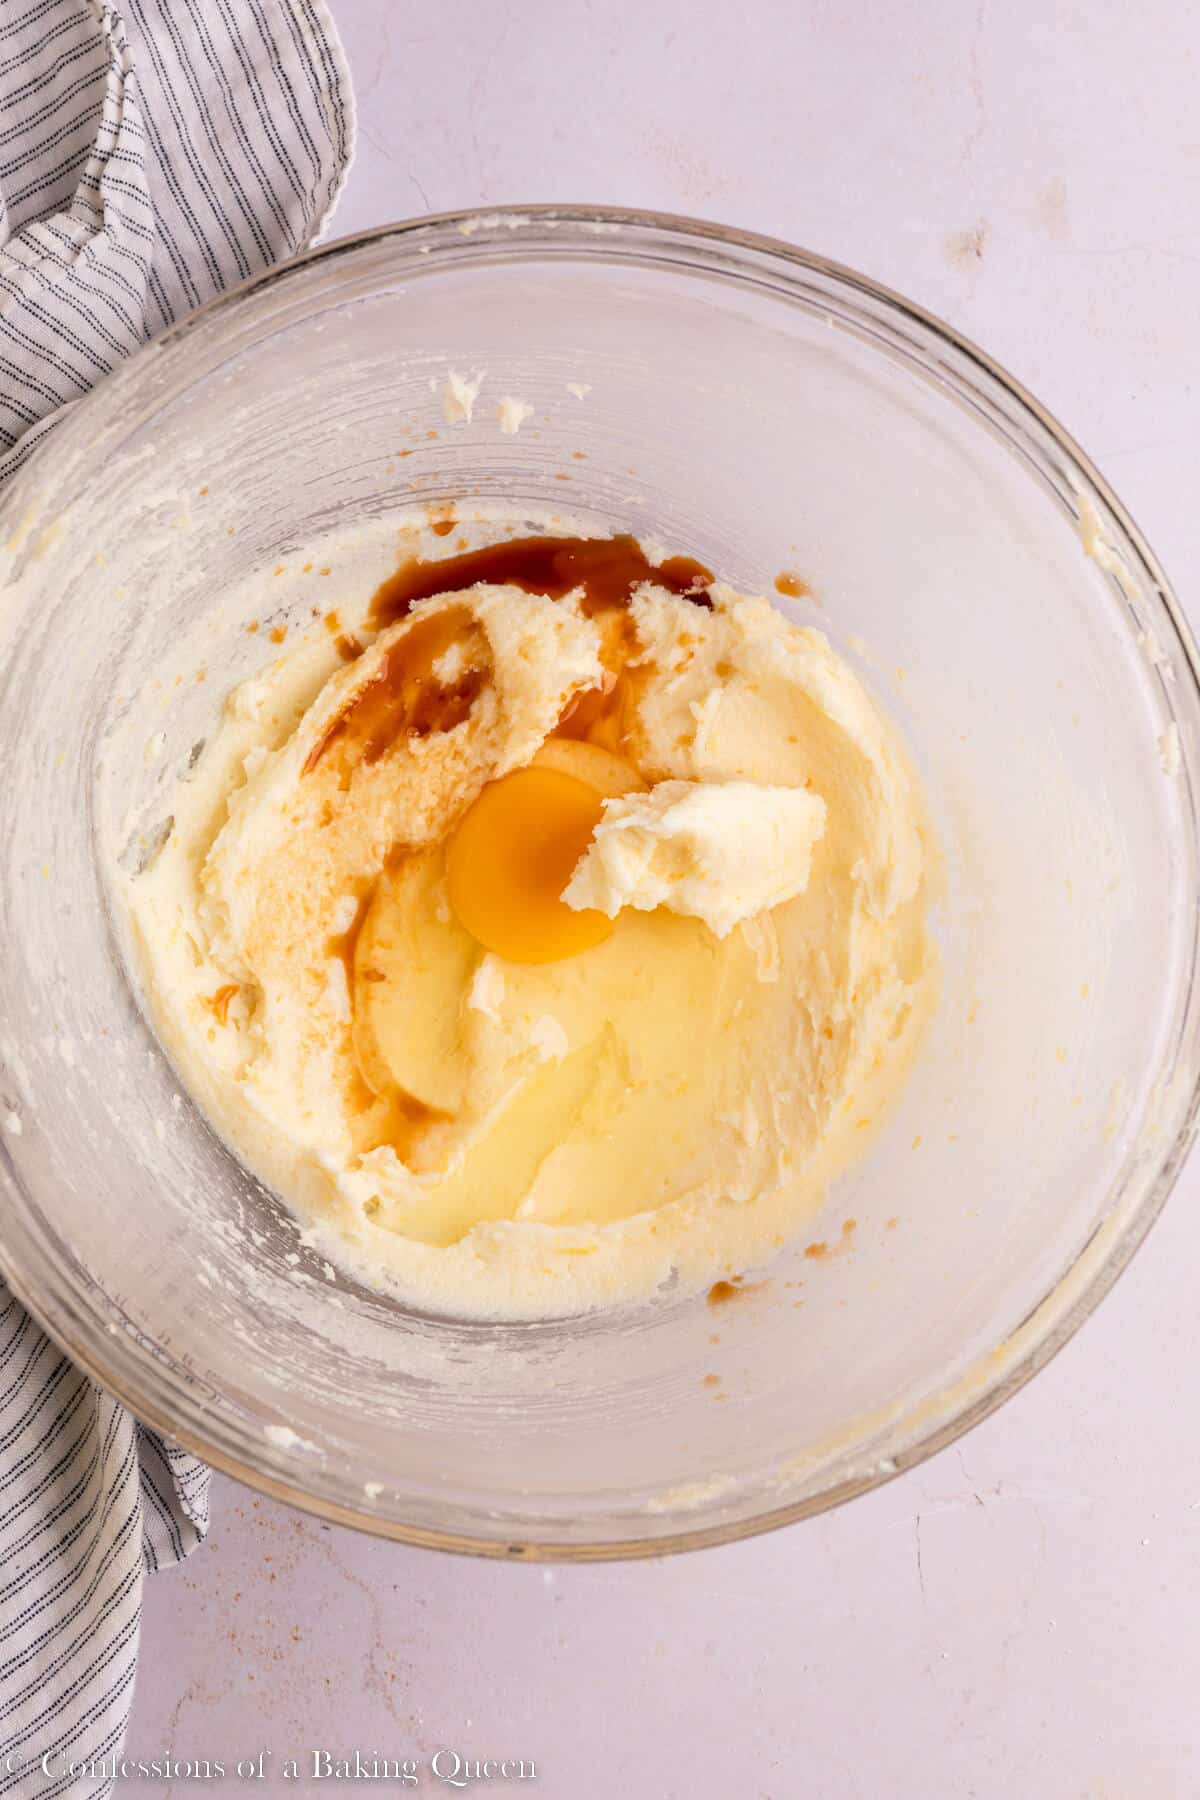 egg and vanilla extract added to creamed butter in a glass bowl on a light surface with a stripped linen